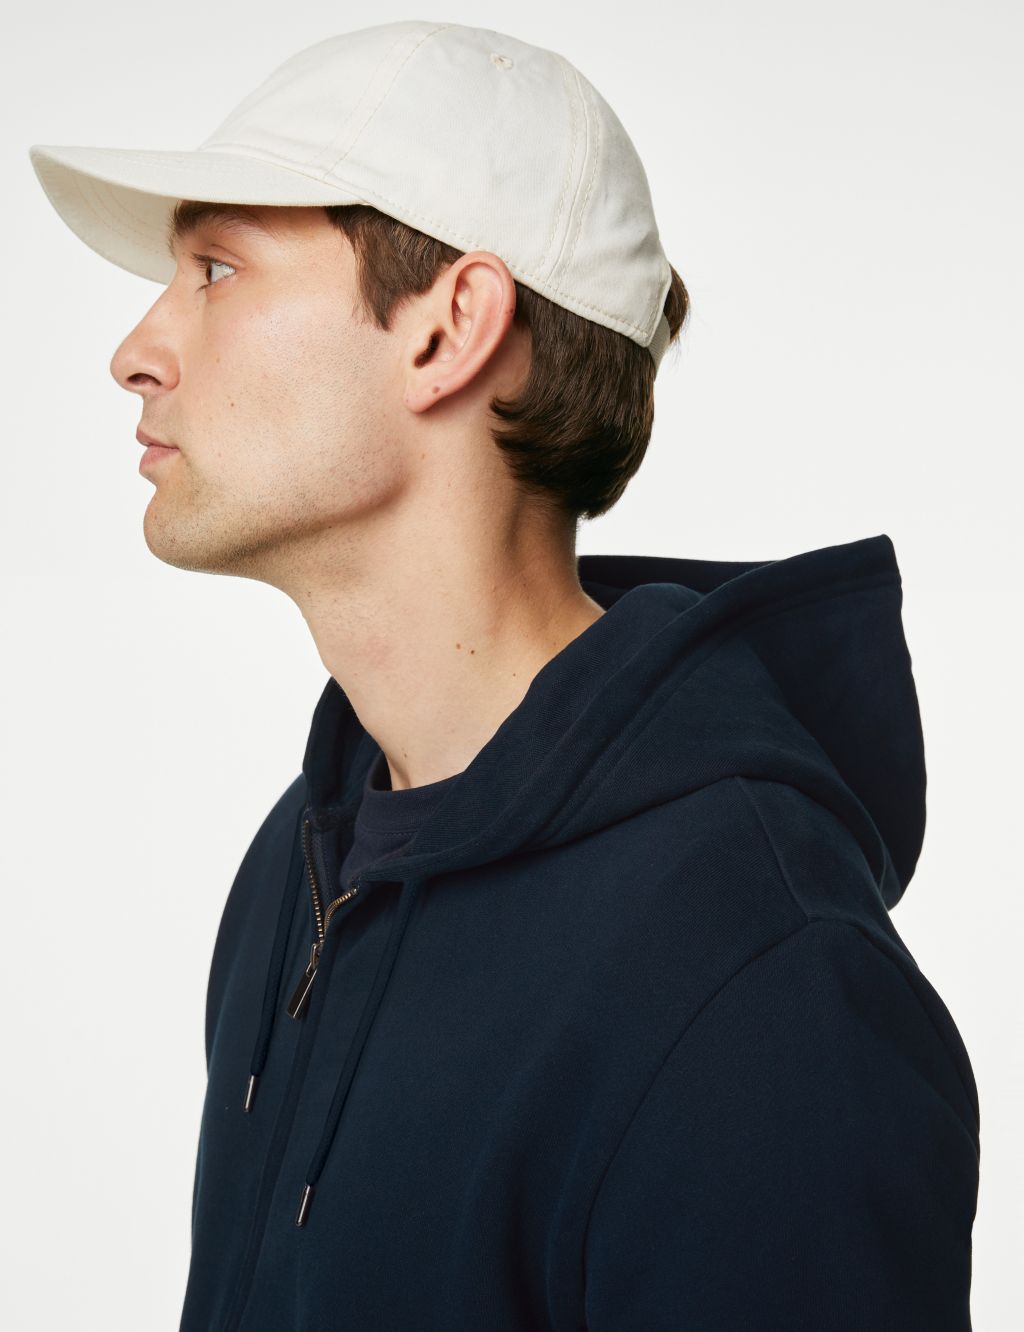 Pure Cotton Hoodie image 4